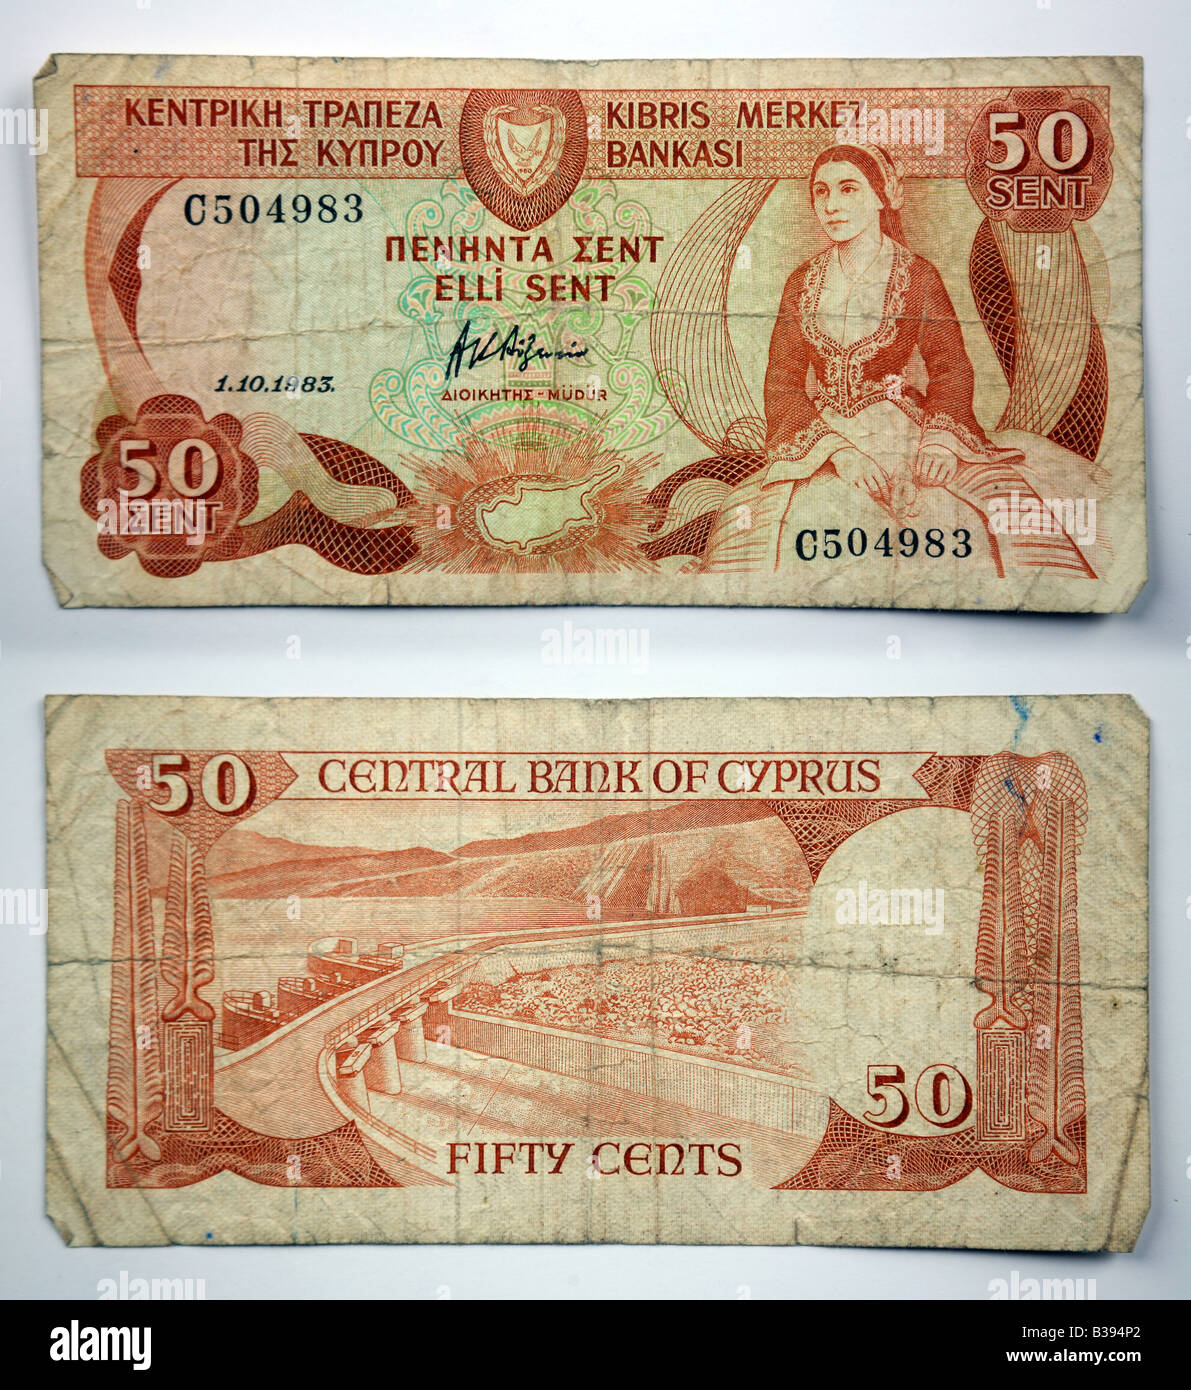 Banknotes of Cyprus Cypriot Pound 50 cents Stock Photo